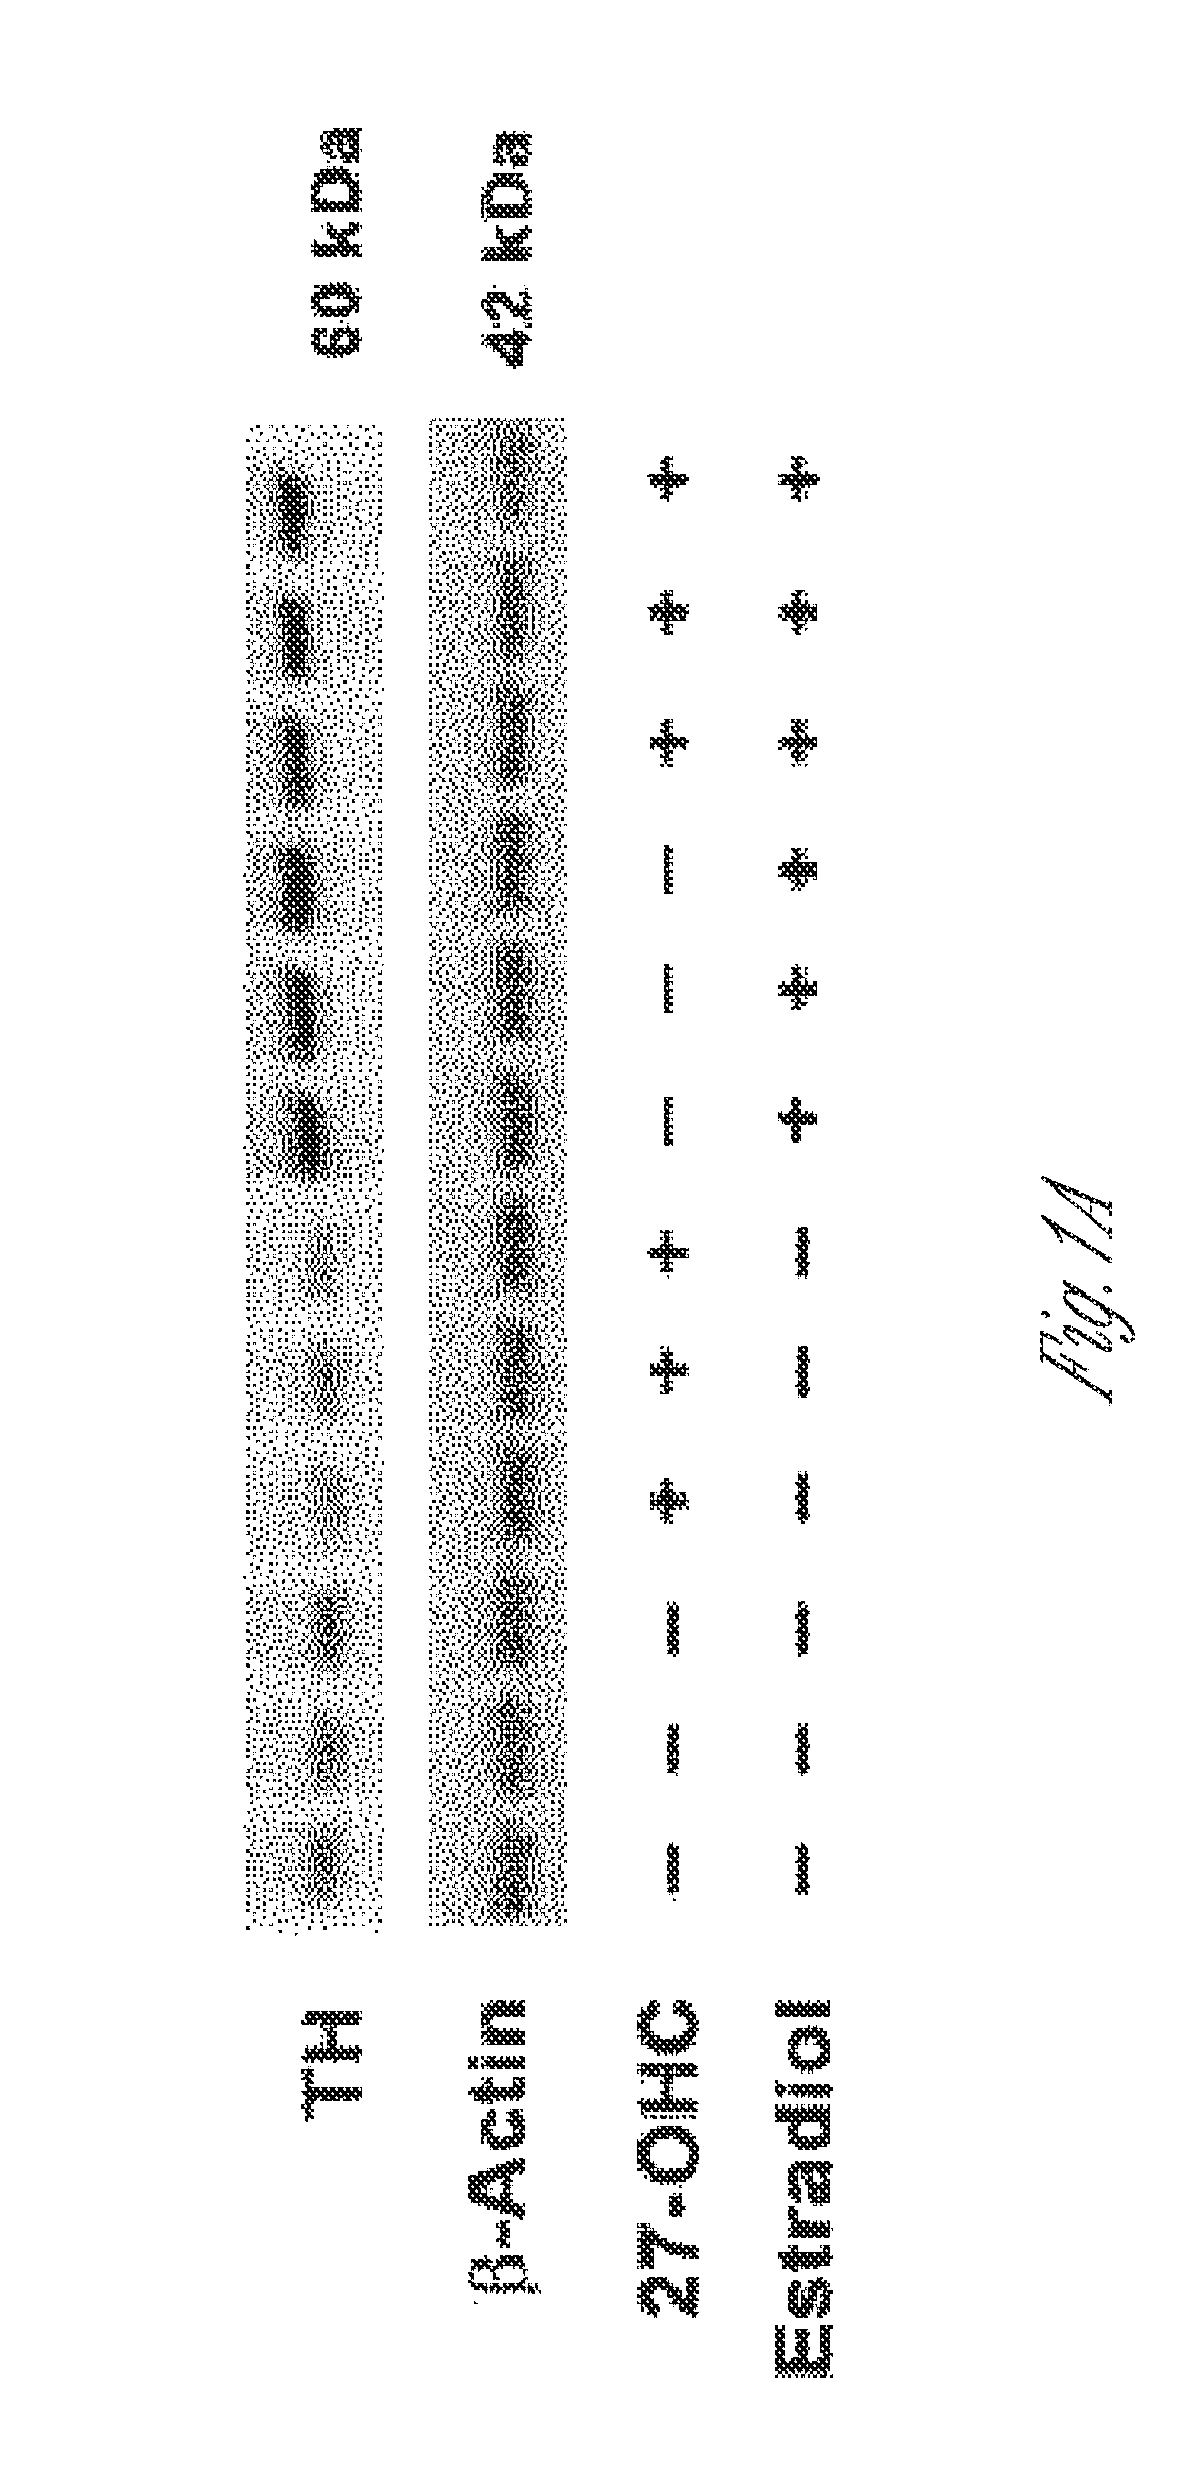 Combination of liver x receptor modulator and estrogen receptor modulator for the treatment of age-related diseases